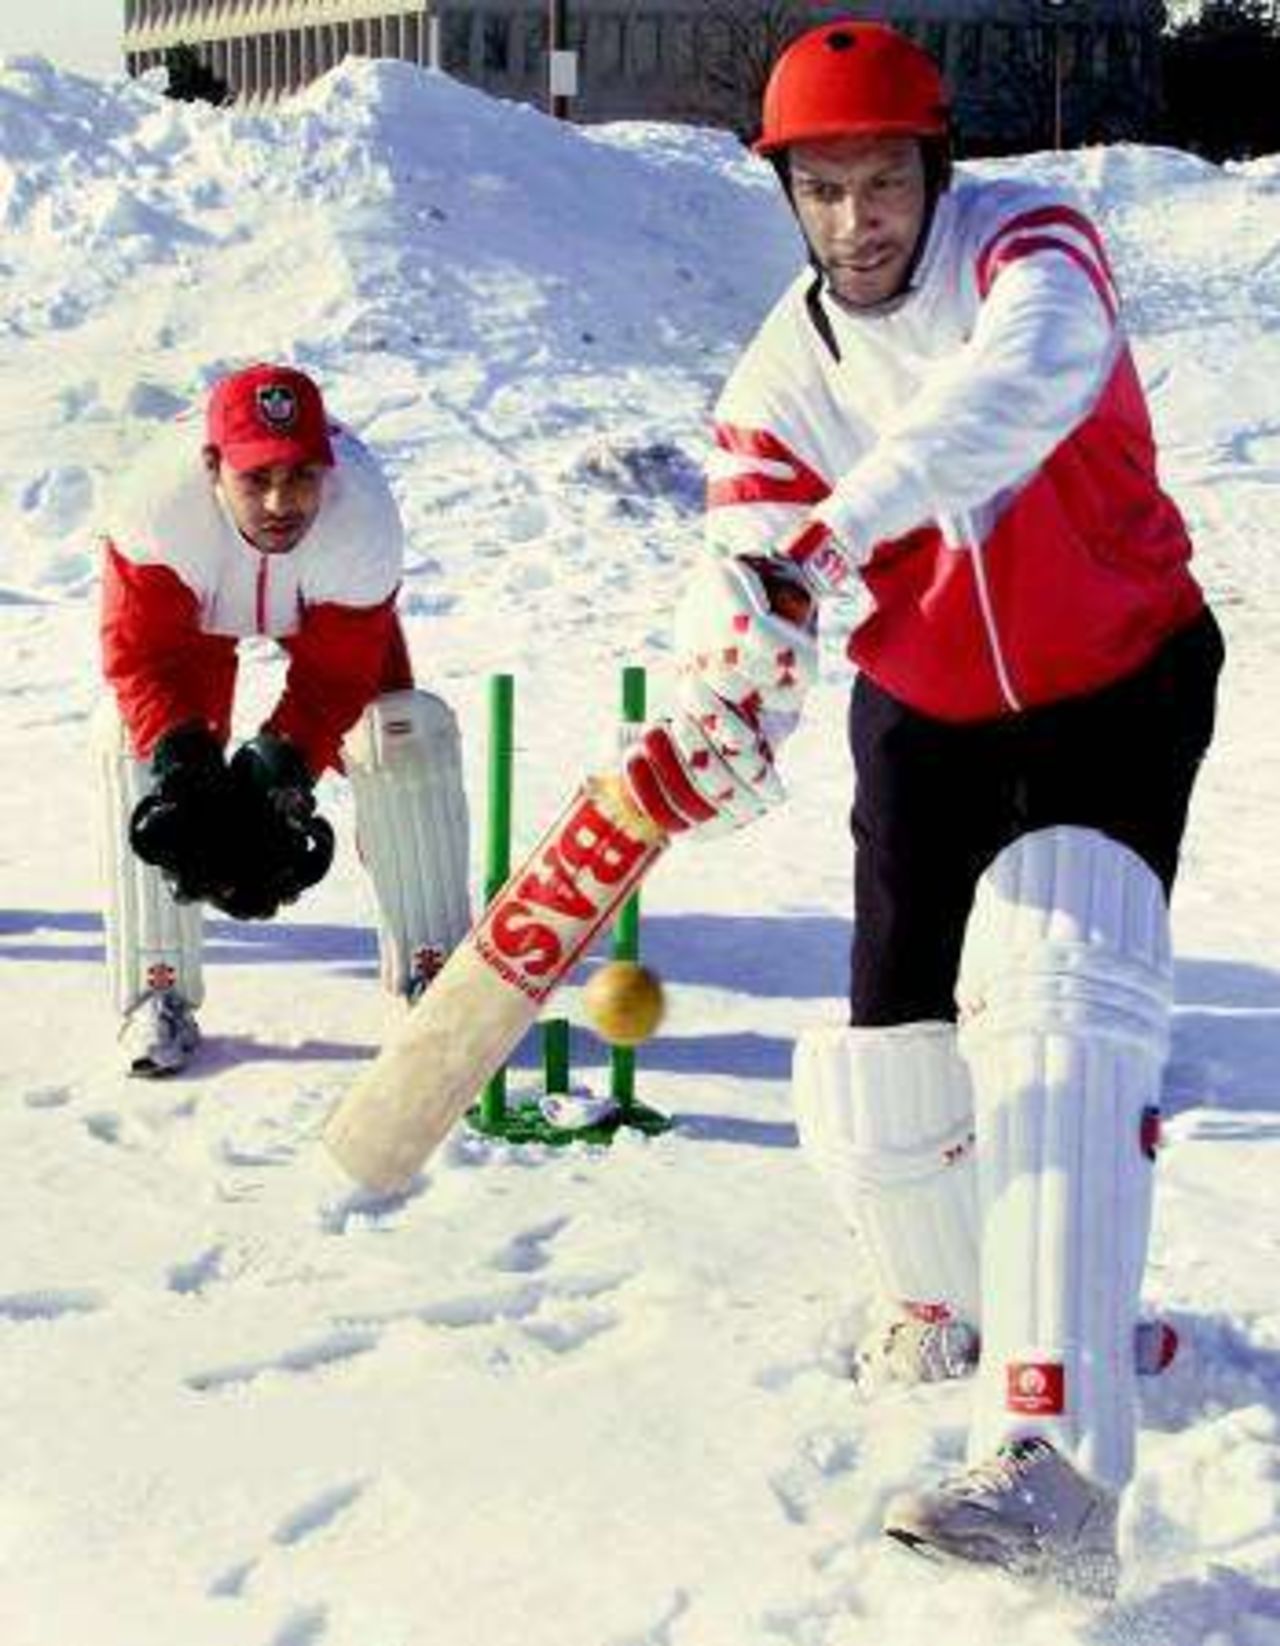 Davis Joseph and Ashish Bagai practice in adverse conditions in a photo call in Toronto prior to leaving for the World Cup